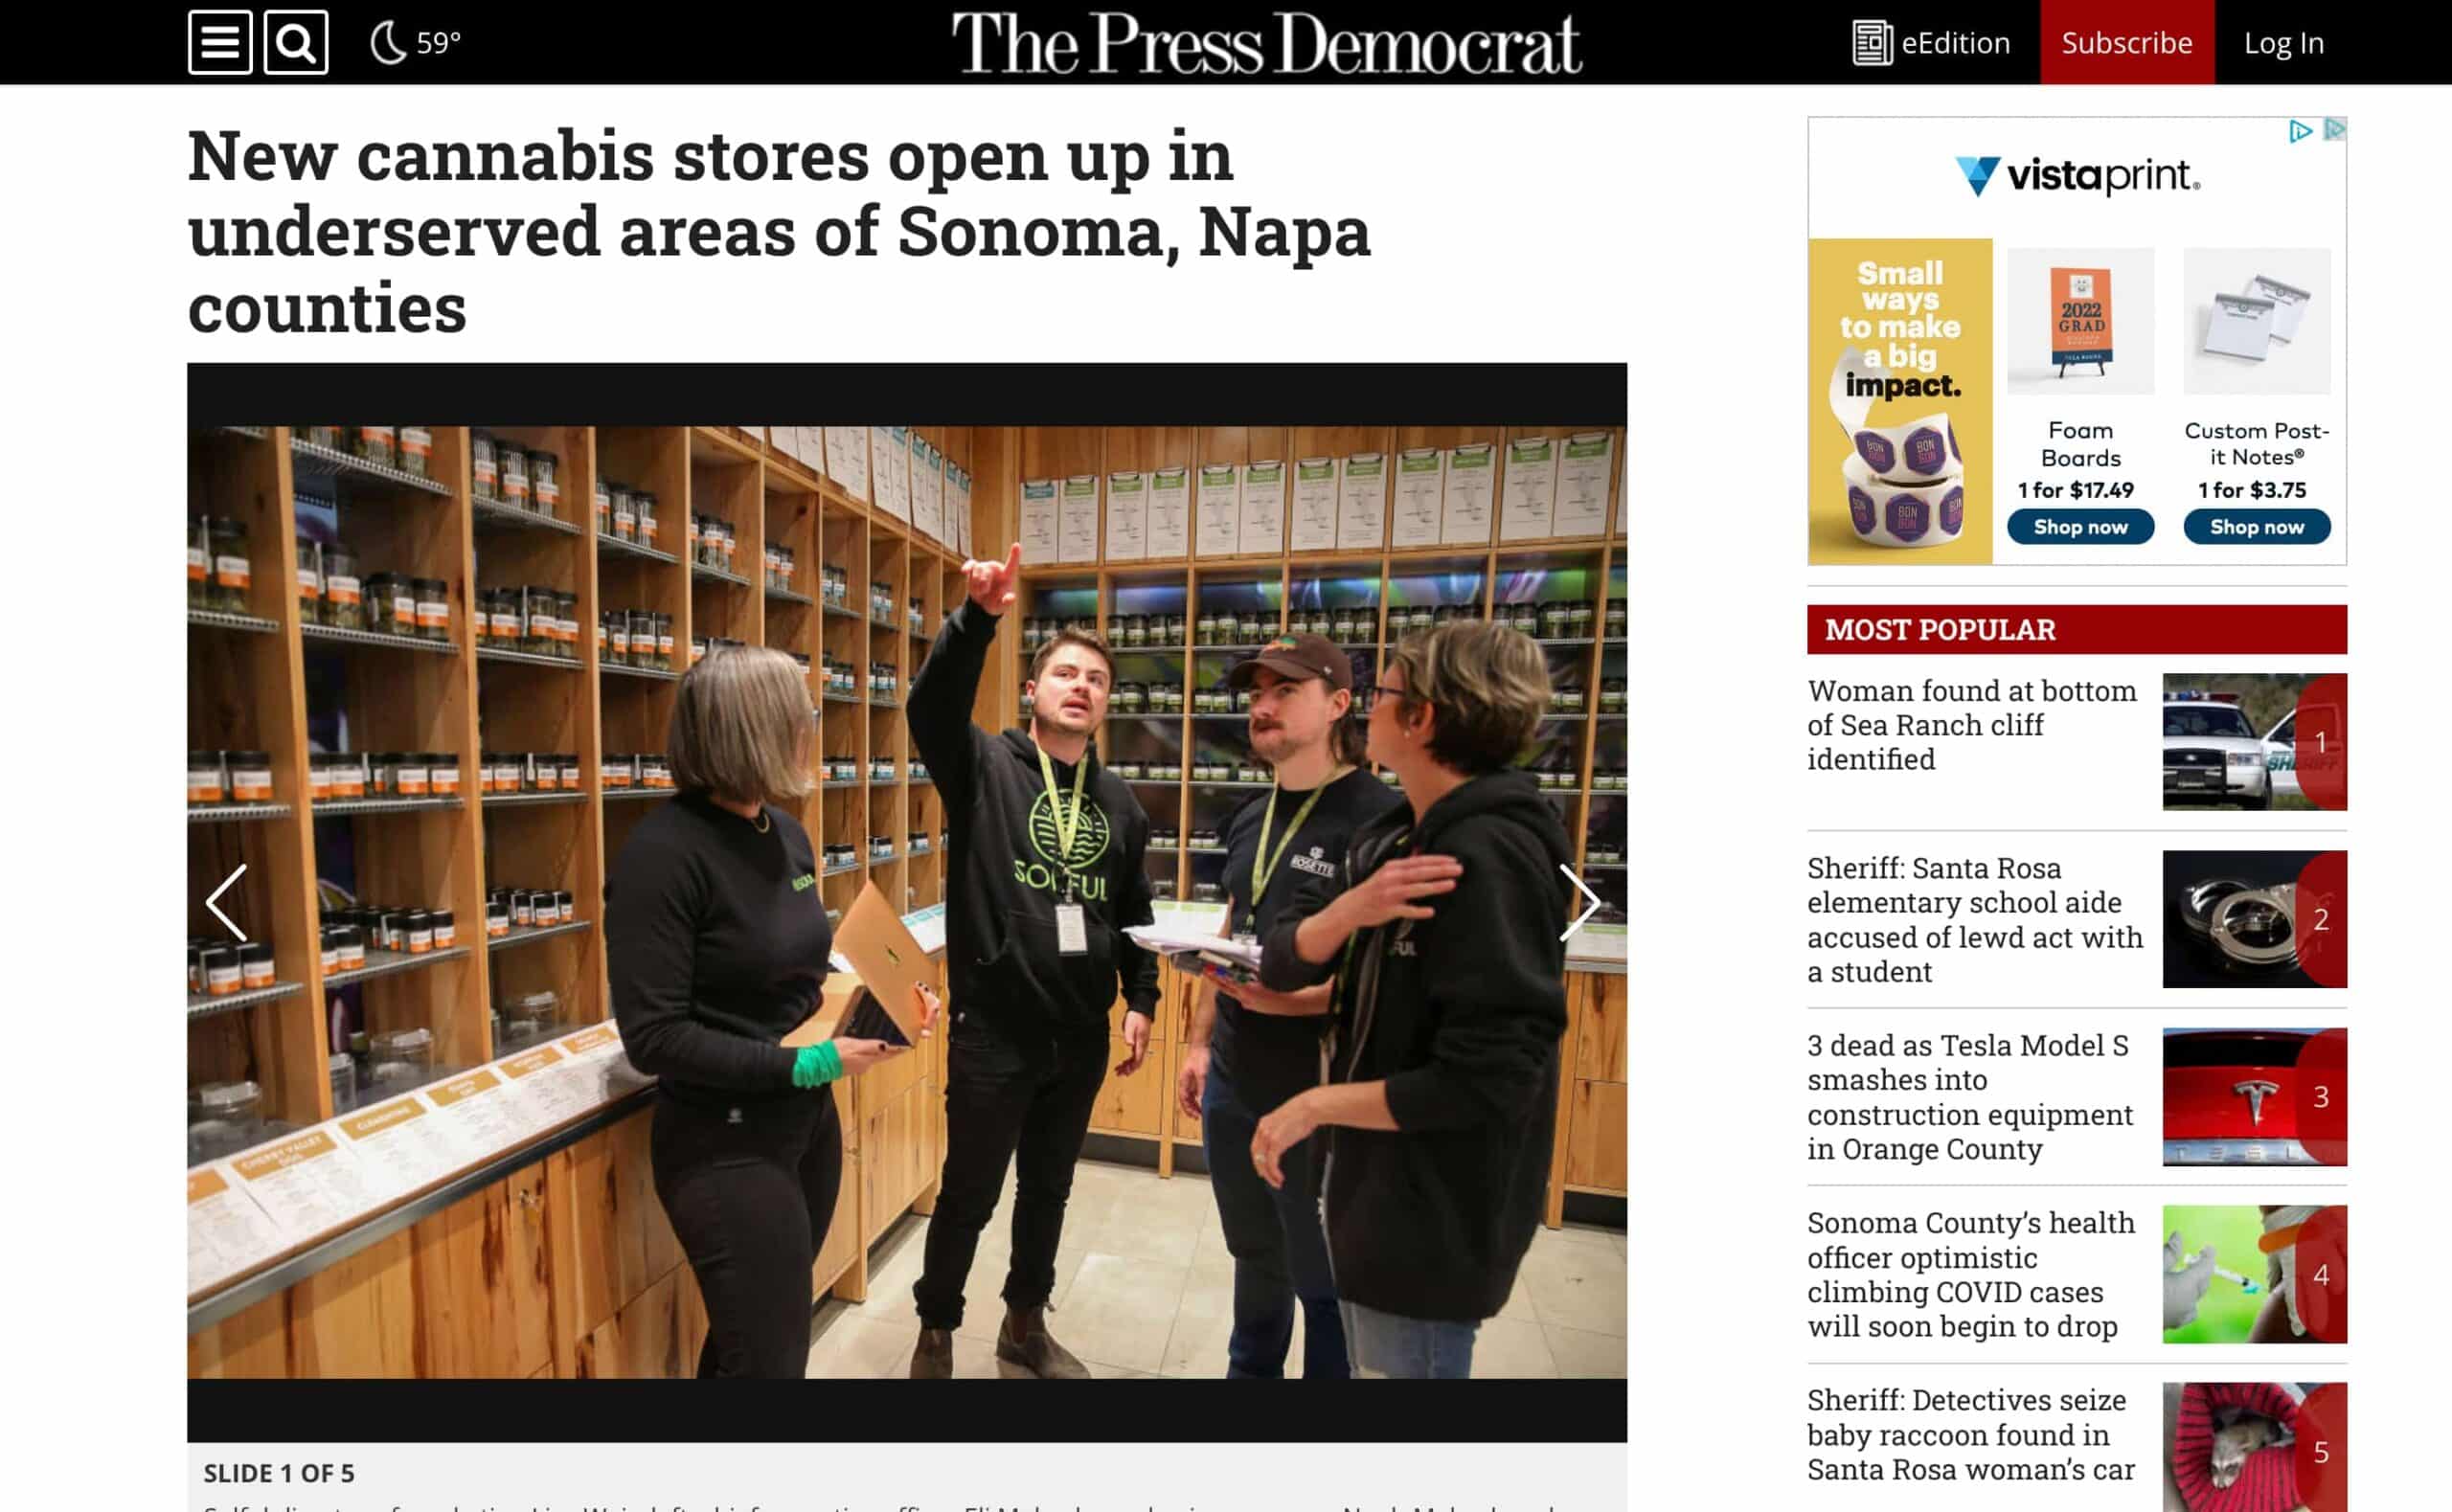 image of new cannabis stores the press democrat